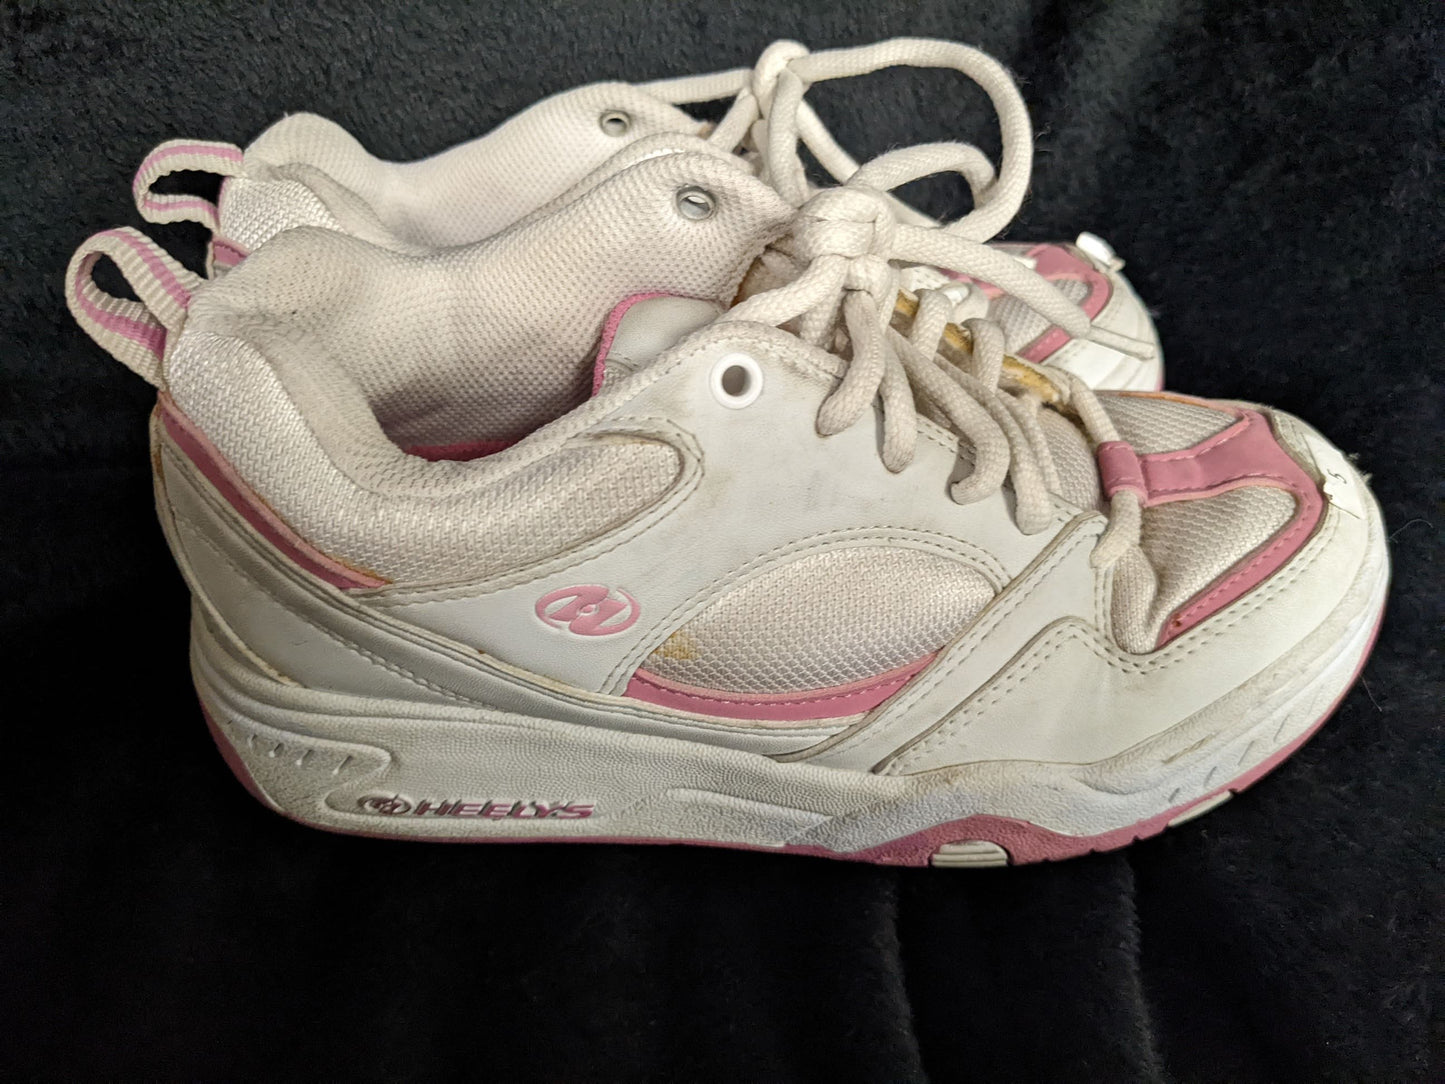 Heely's Roller Shoes Size 5 Color Pink Condition Used